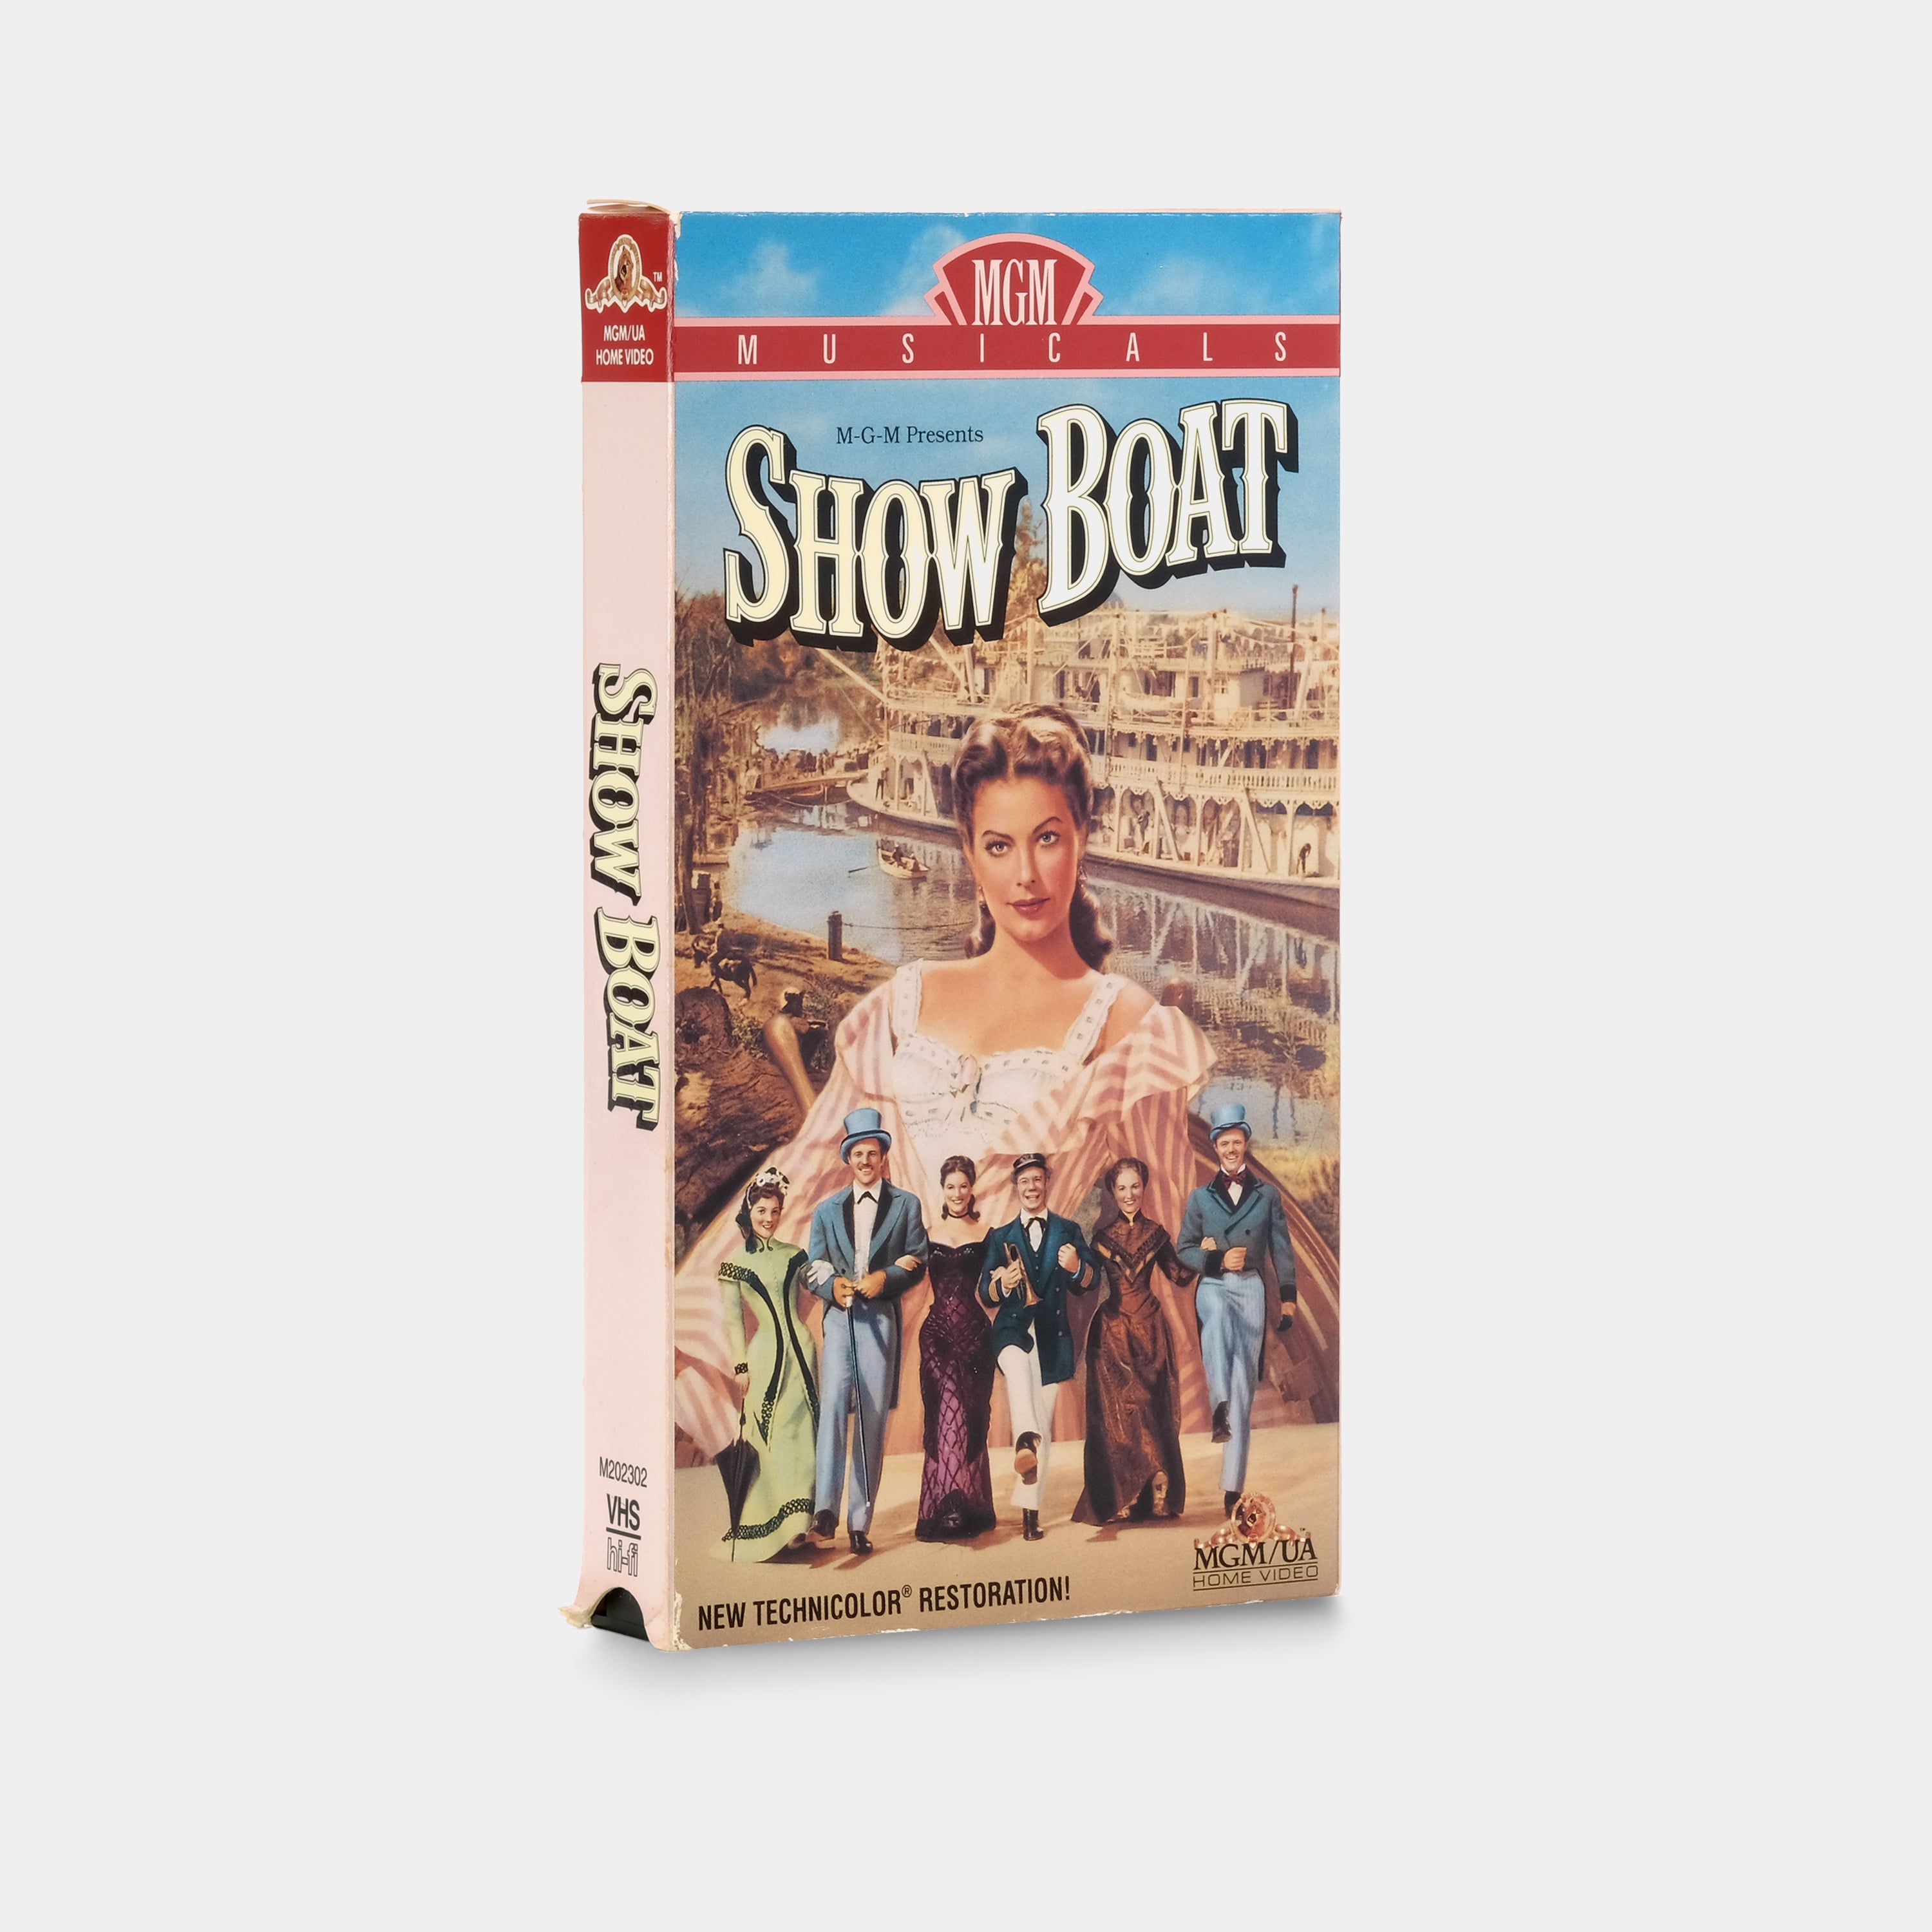 Show Boat VHS Tape